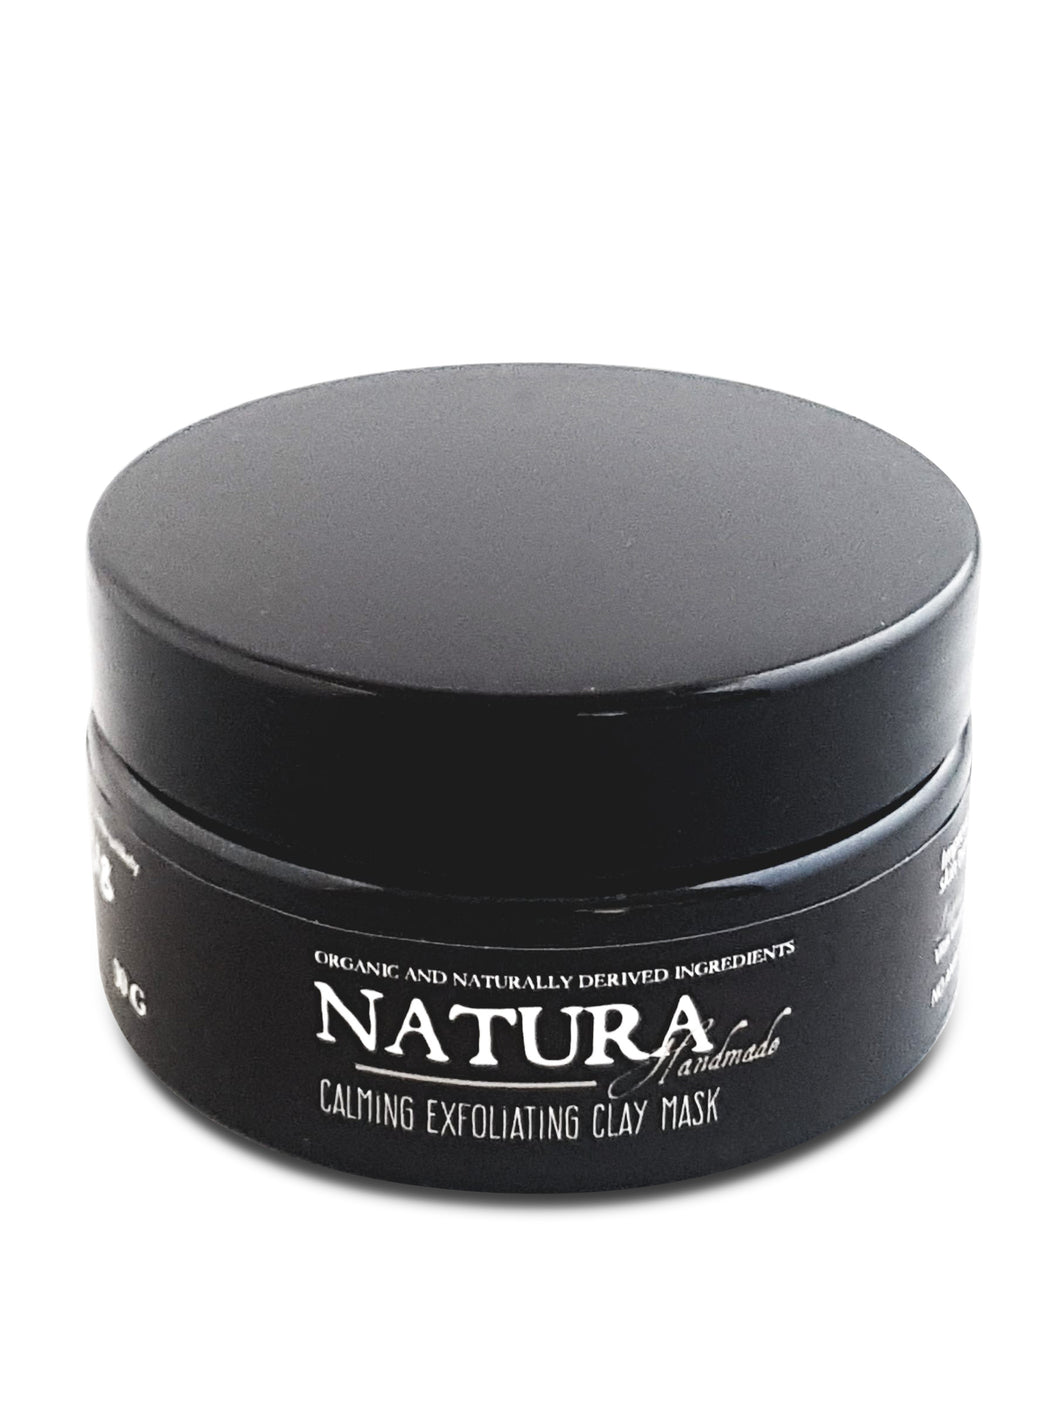 Calming Exfoliating Clay Mask